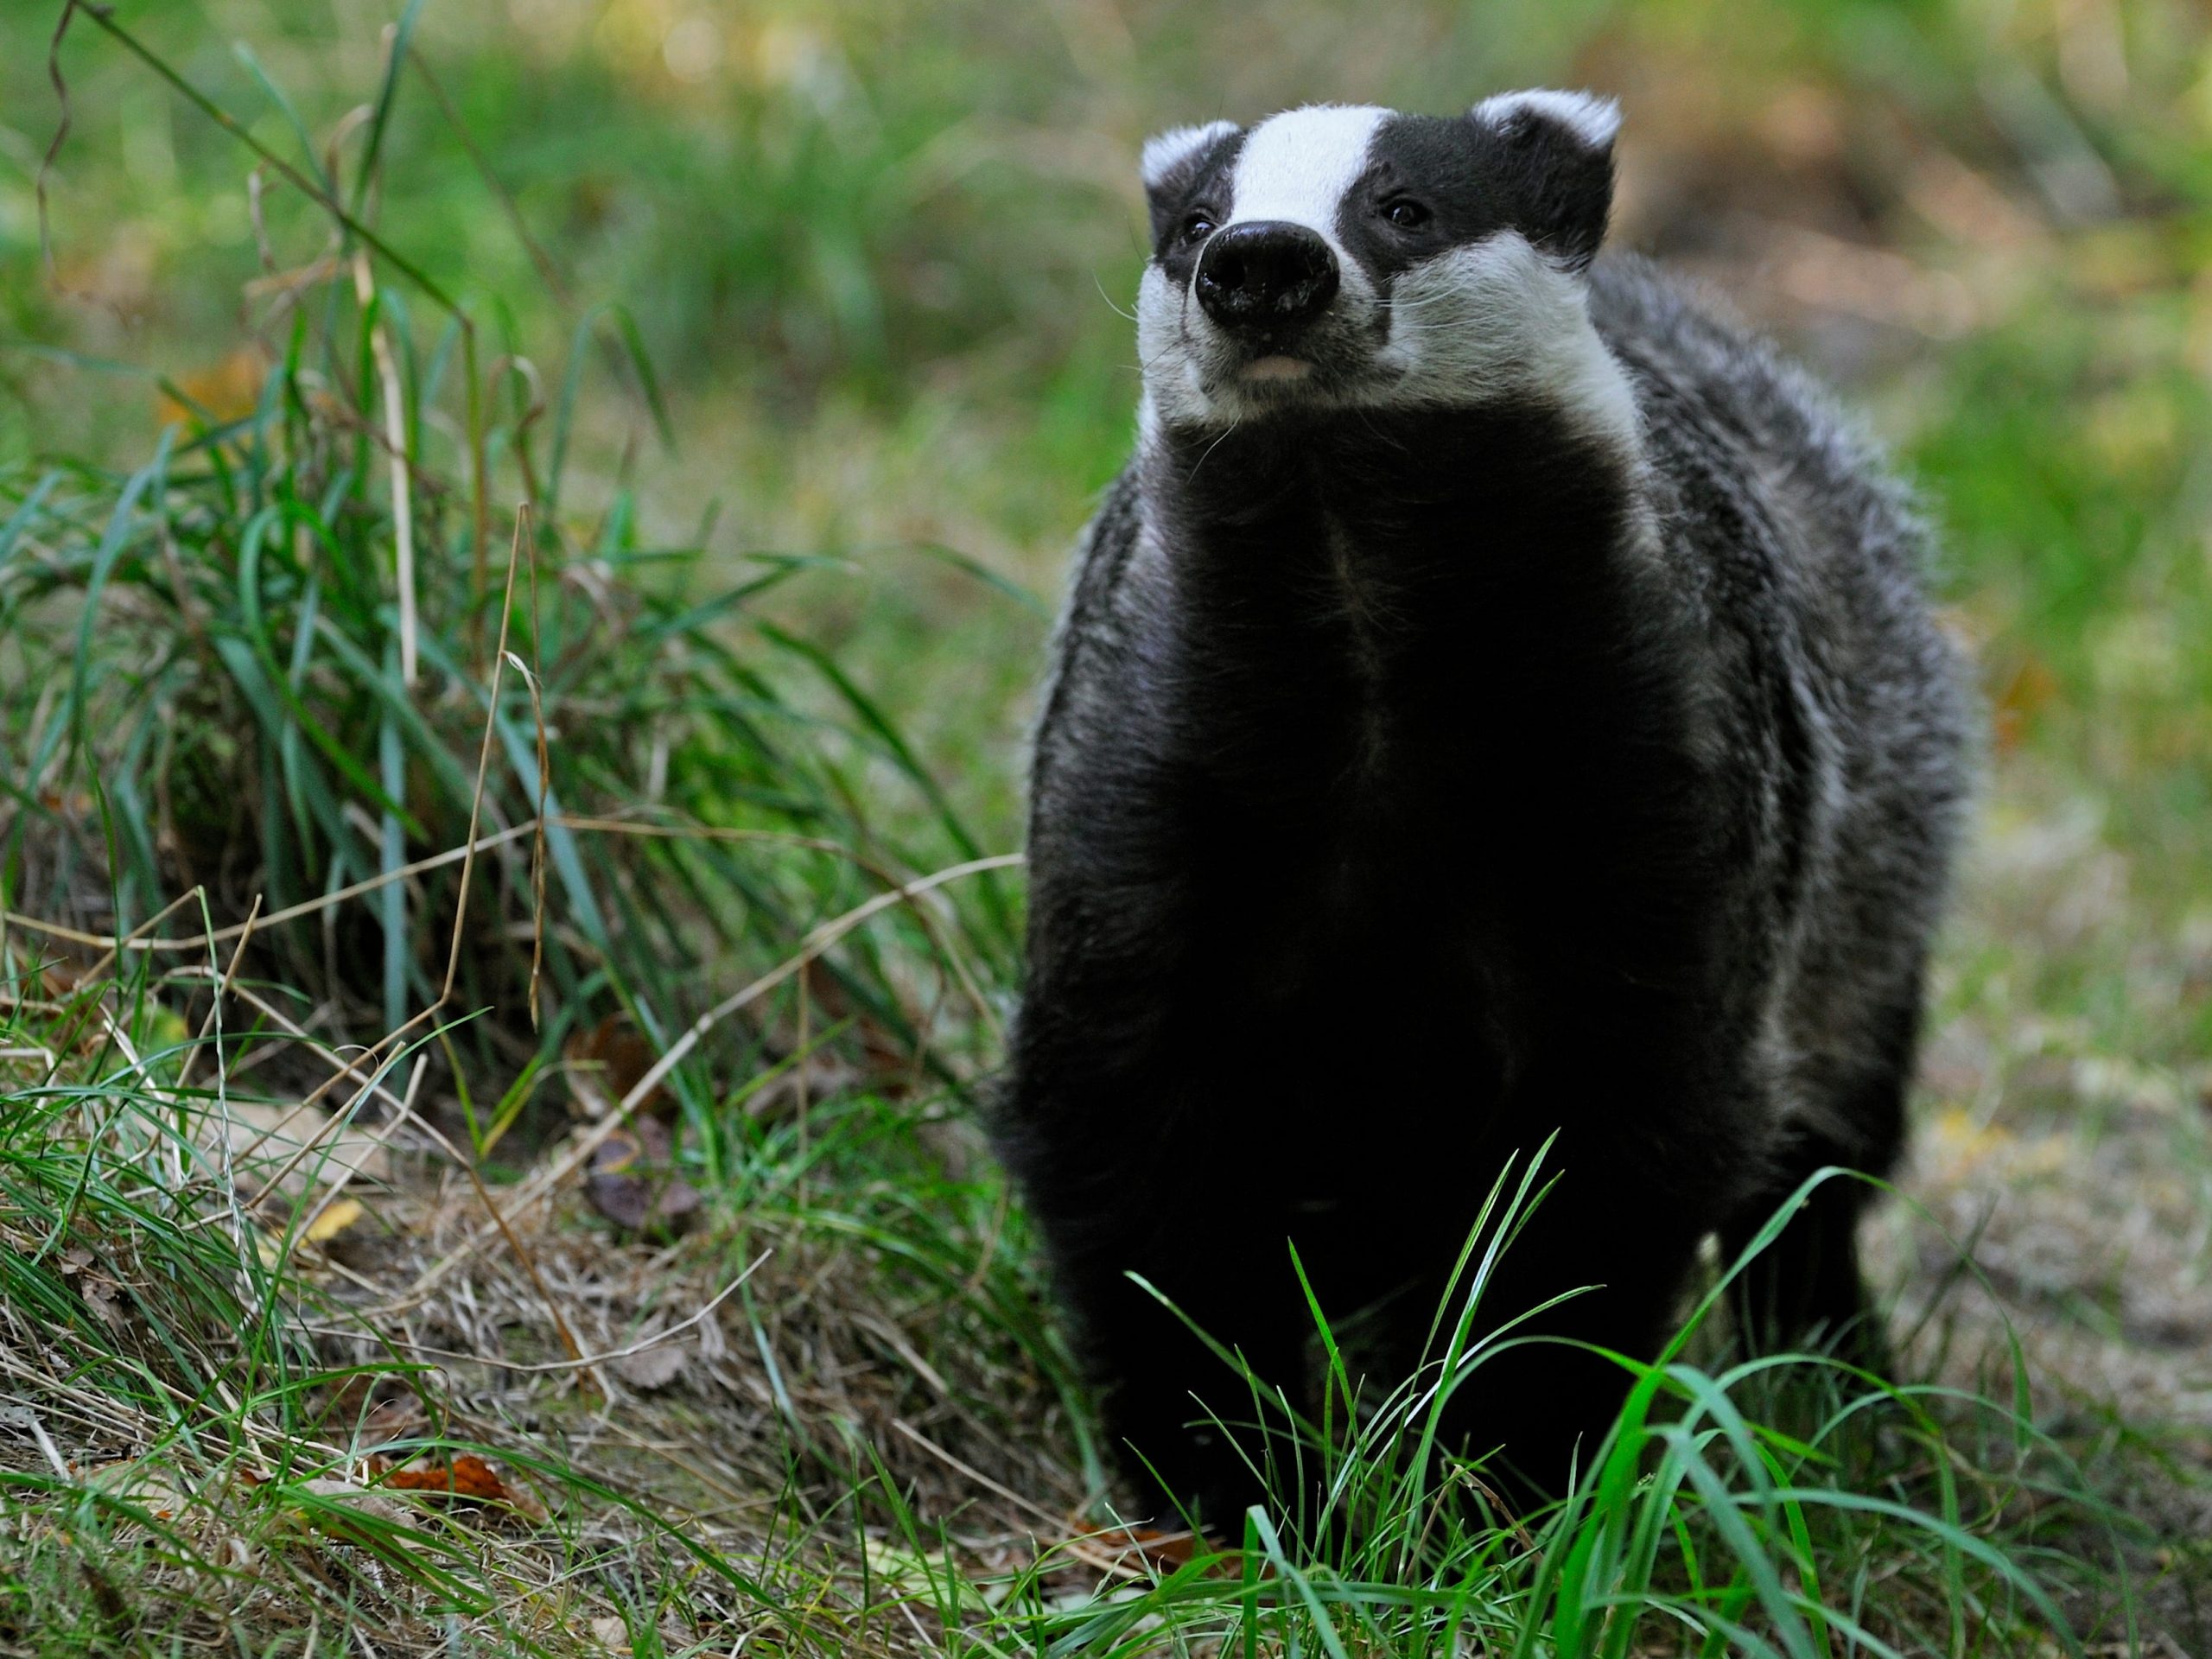 A badger foraging in the woods